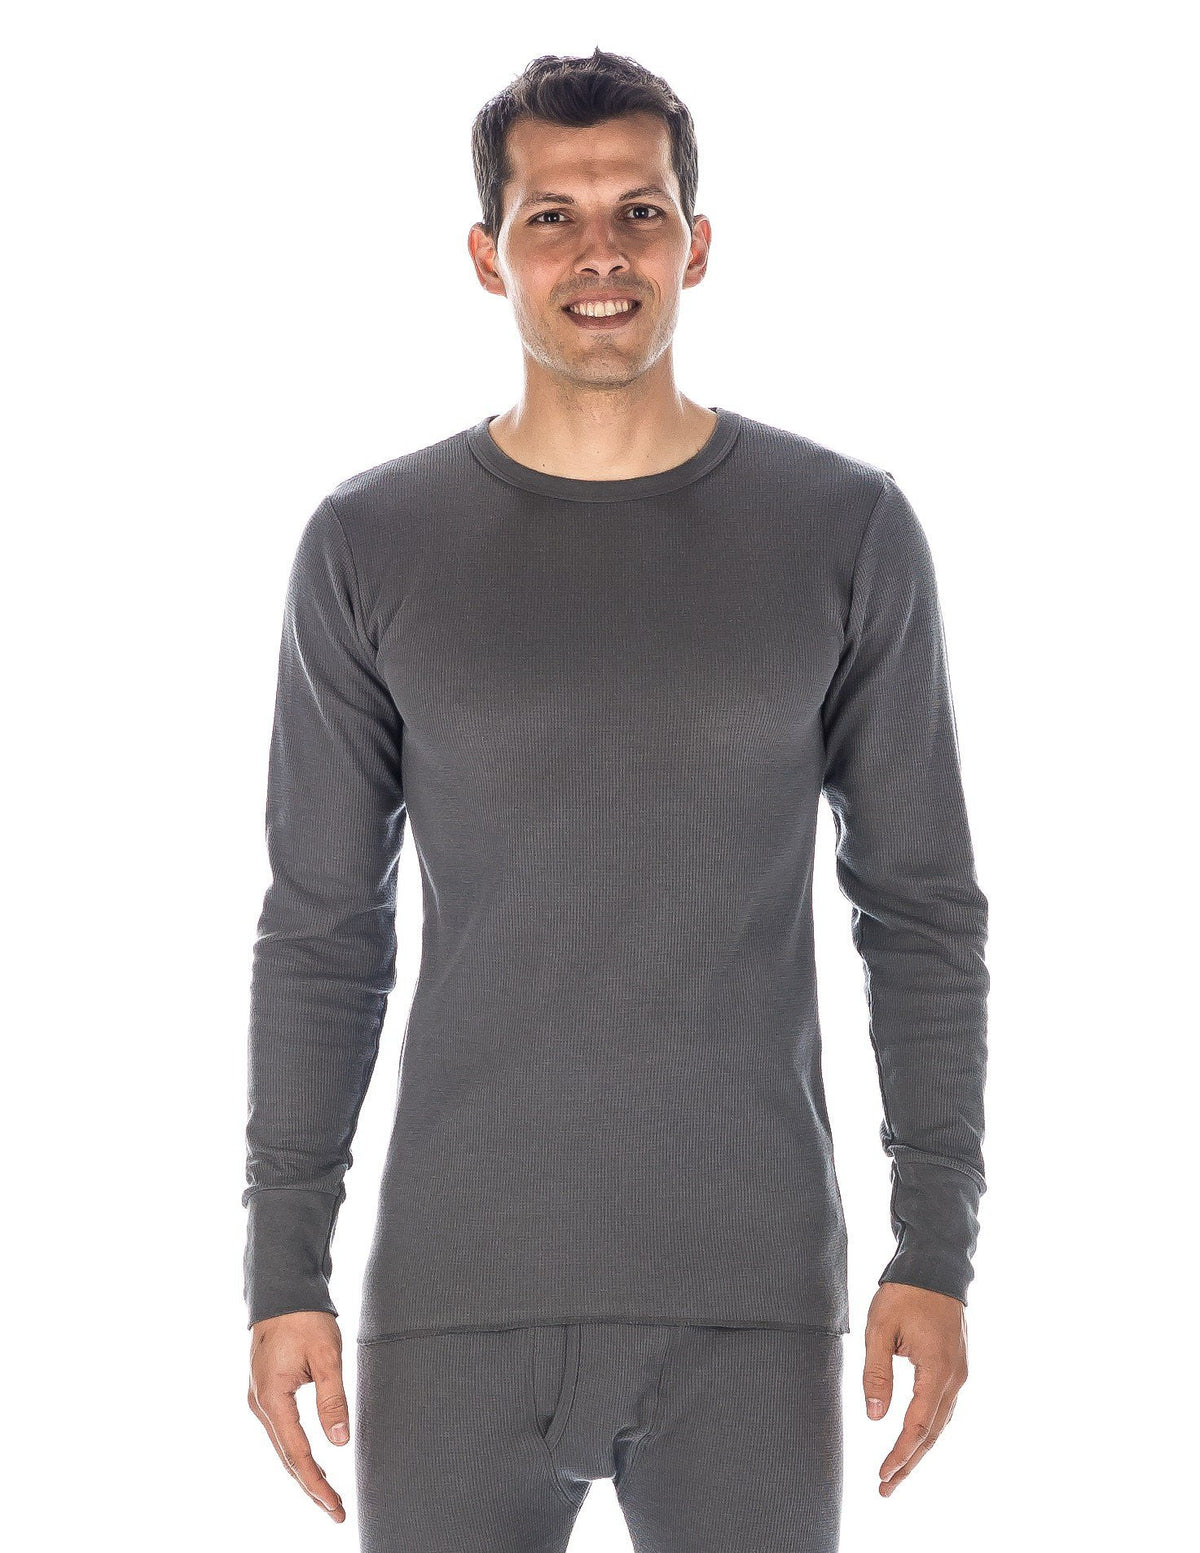 Men's Classic Waffle Knit Thermal Crew Top - Charcoal